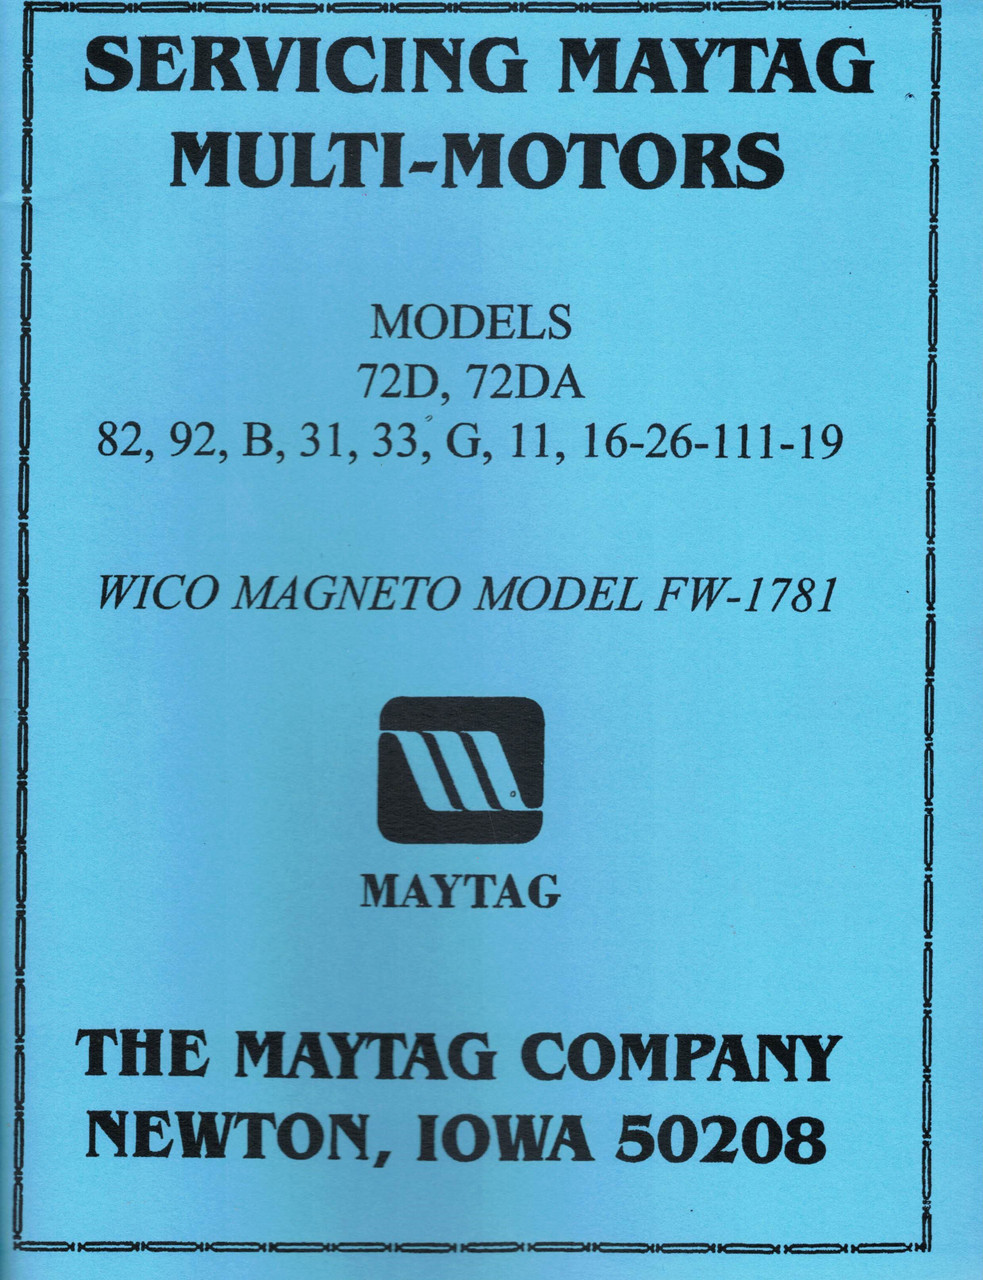 Maytag Gas Motor Engine Service Book Parts Manual & Serial # List Model 92 82 72 